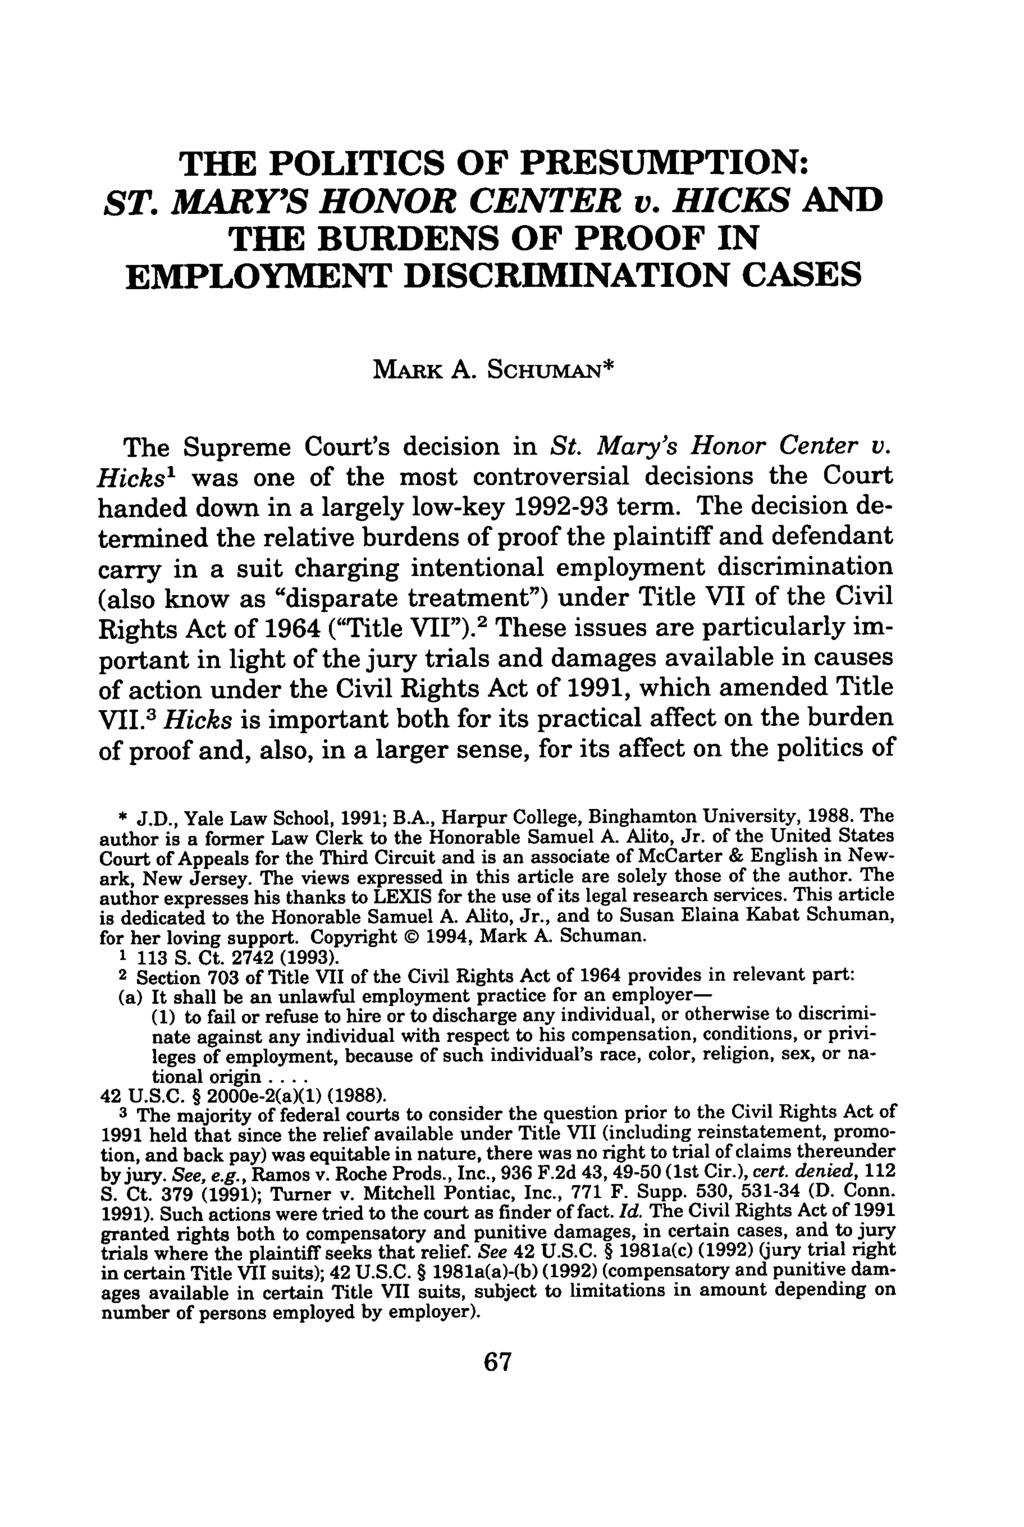 THE POLITICS OF PRESUMPTION: ST. MARY'S HONOR CENTER v. HICKS AND THE BURDENS OF PROOF IN EMPLOYMENT DISCRIMINATION CASES MARK A. SCHUMAN* The Supreme Court's decision in St. Mary's Honor Center v.